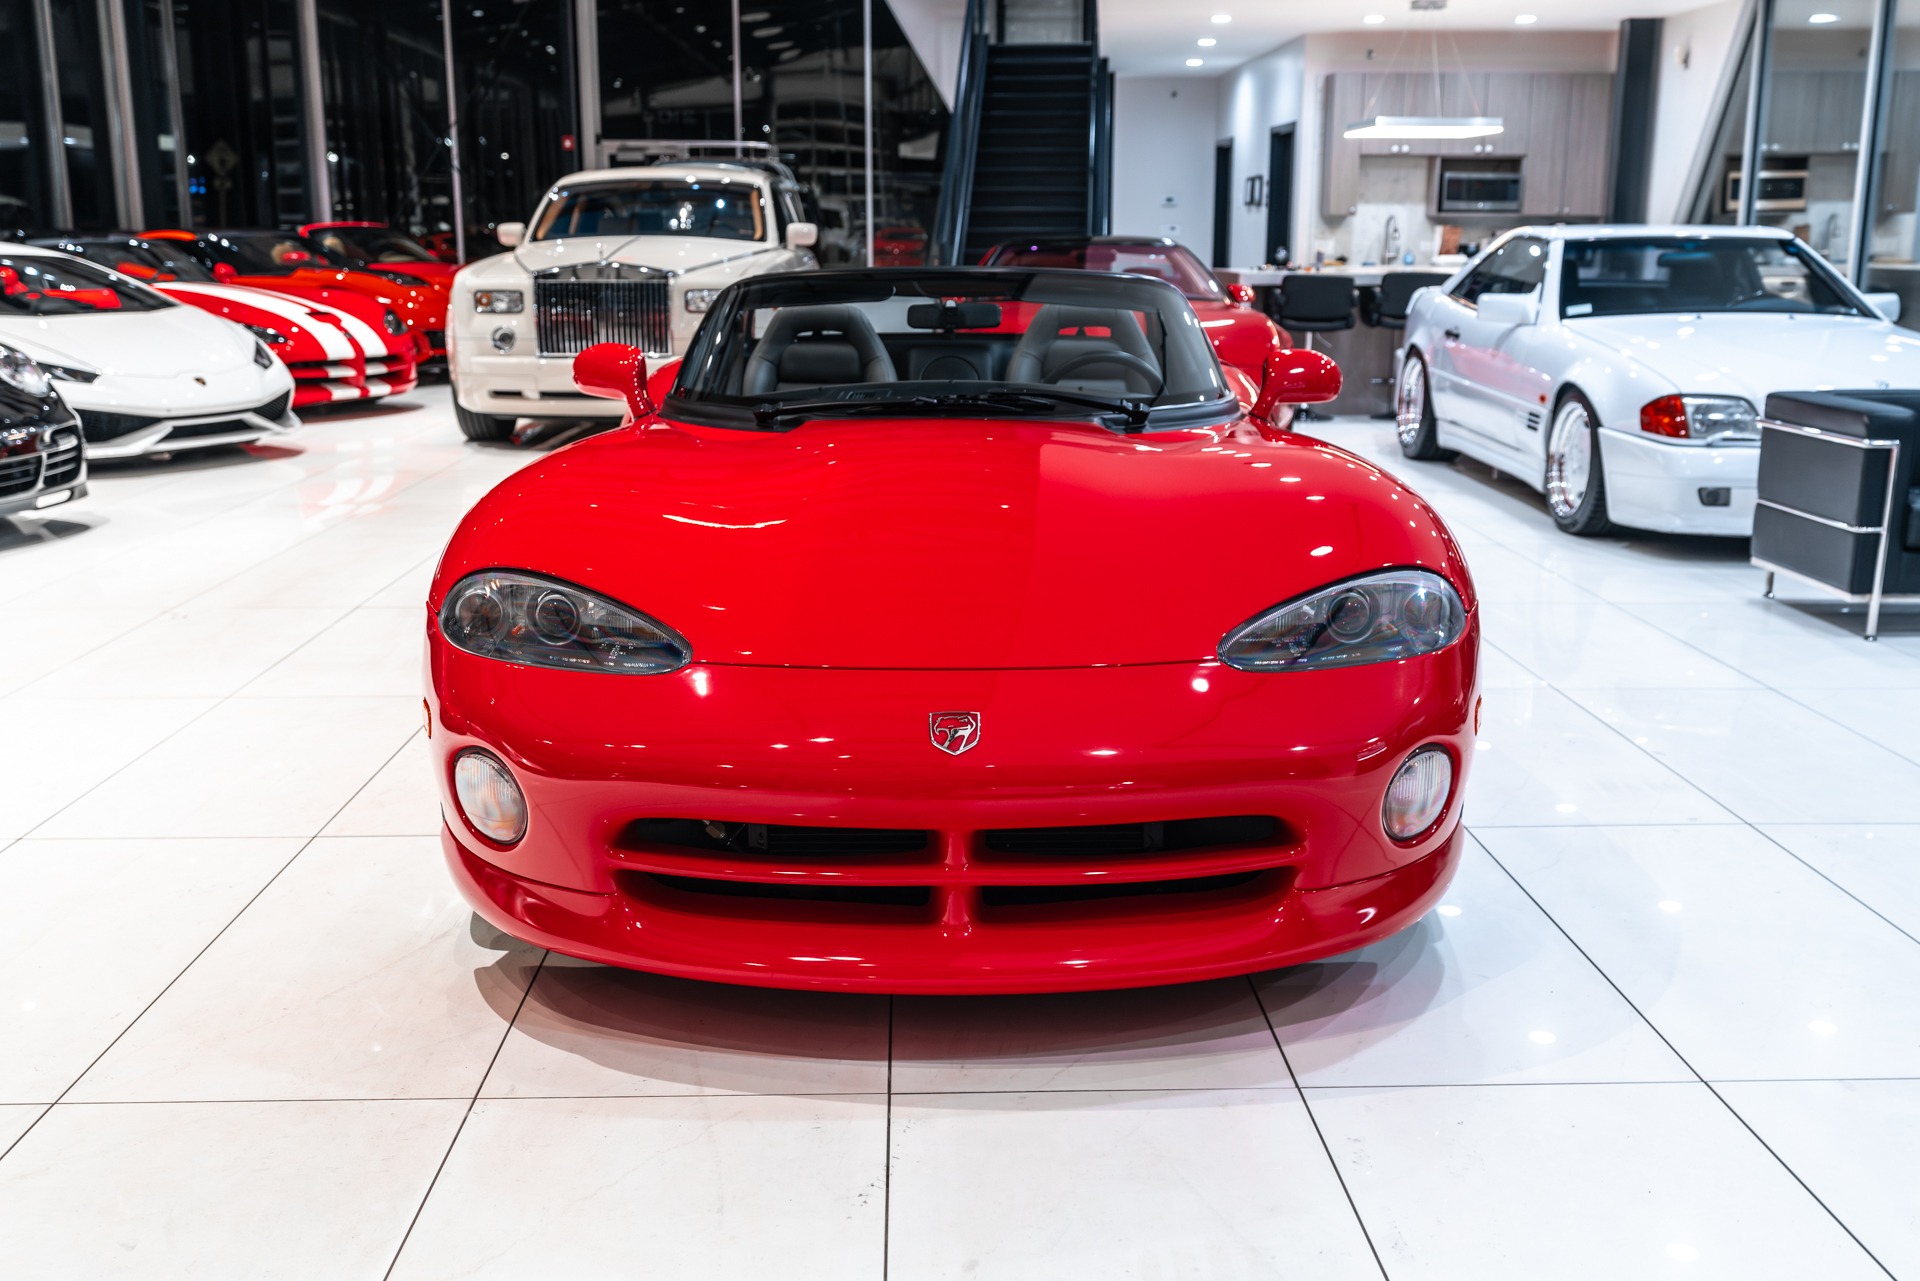 Used-1993-Dodge-Viper-RT10-Convertible-Collector-Condition-6-Speed-Manual-Only-1923-Miles